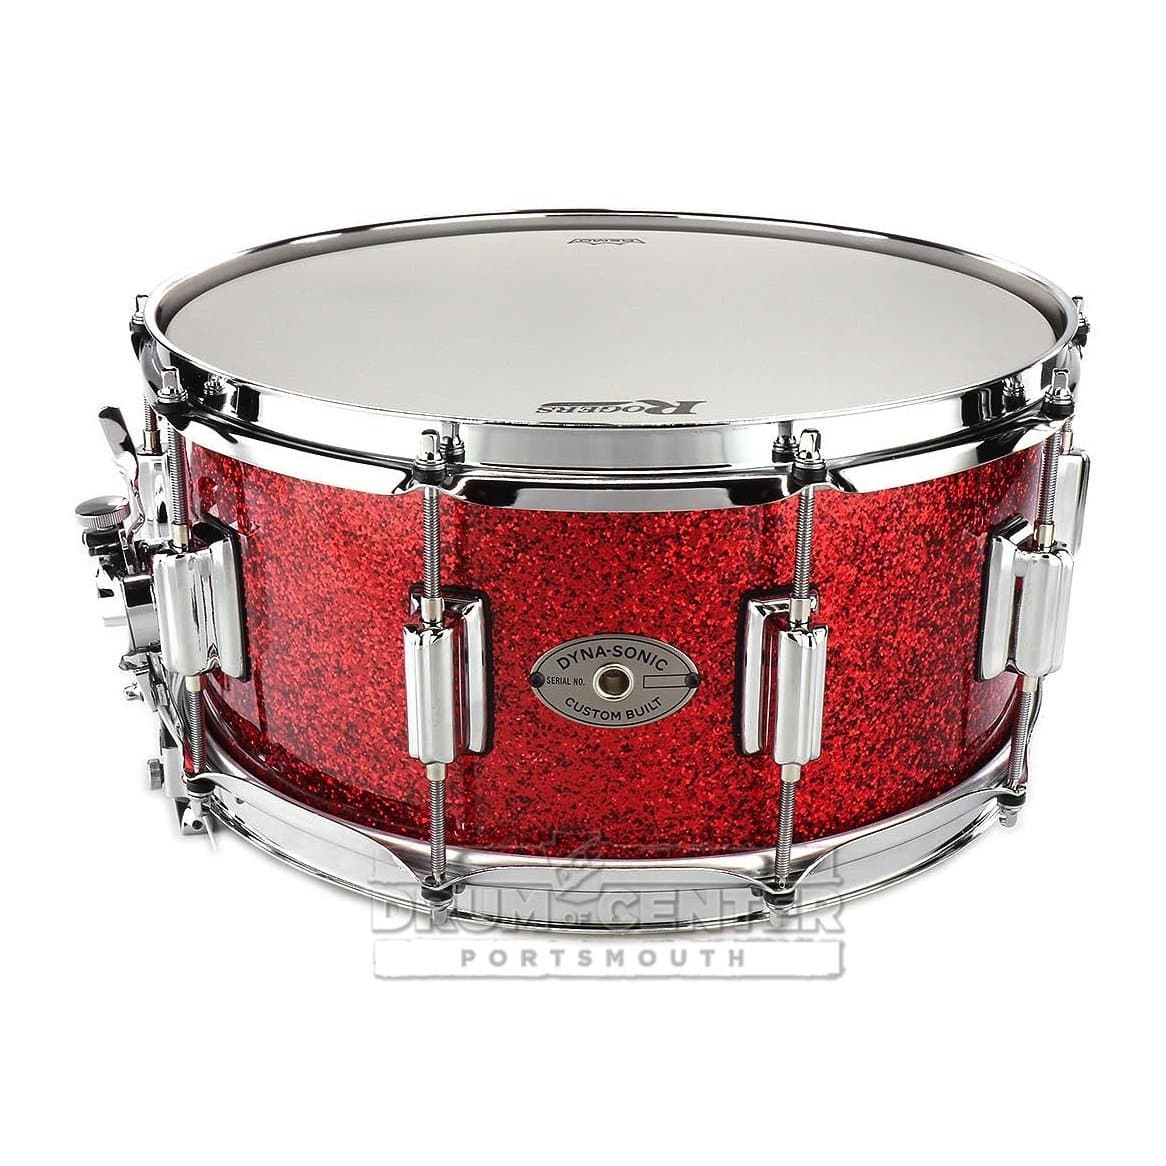 Rogers Dyna-sonic Wood Shell Snare Drum 14x6.5 Red Sparkle Lacquer